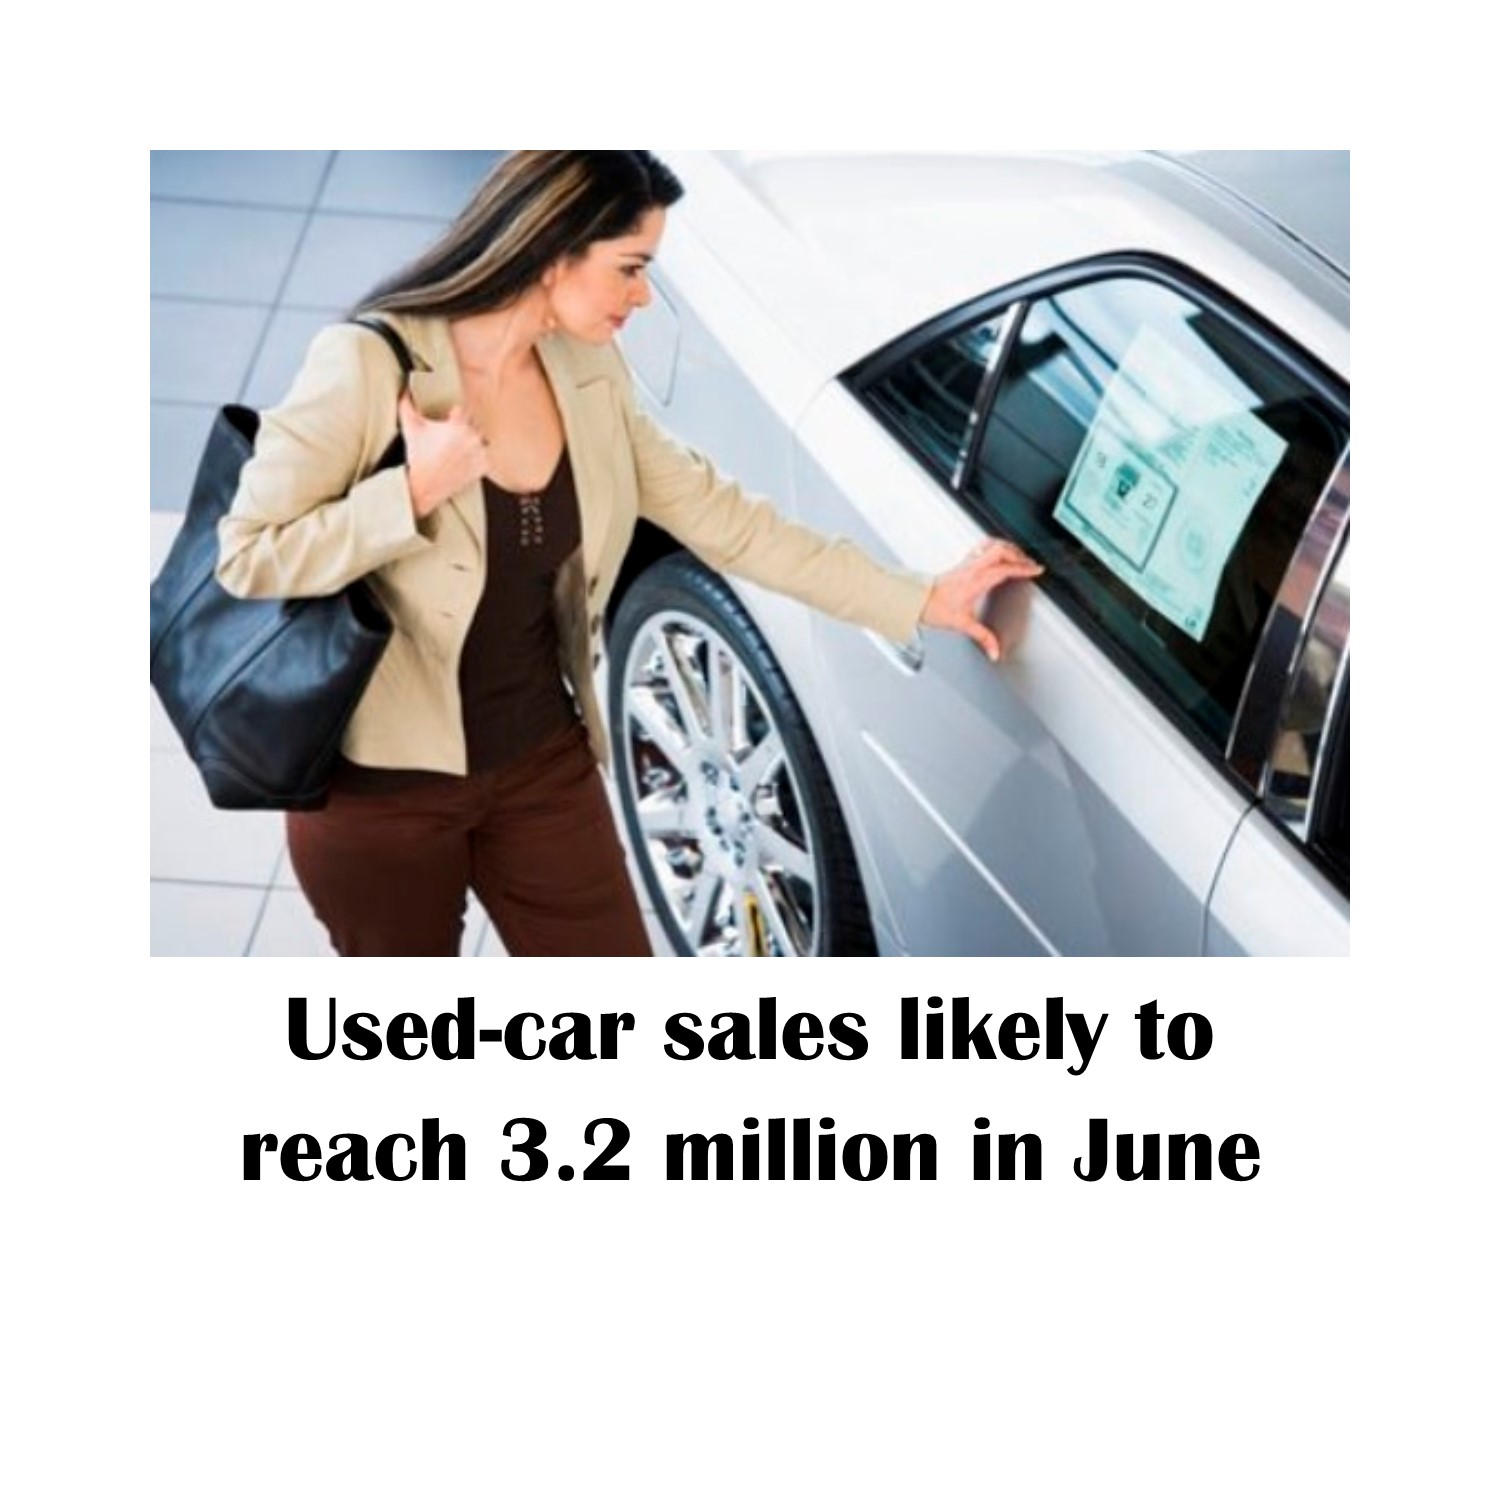 Used car sales likely to reach 3.2 million in June